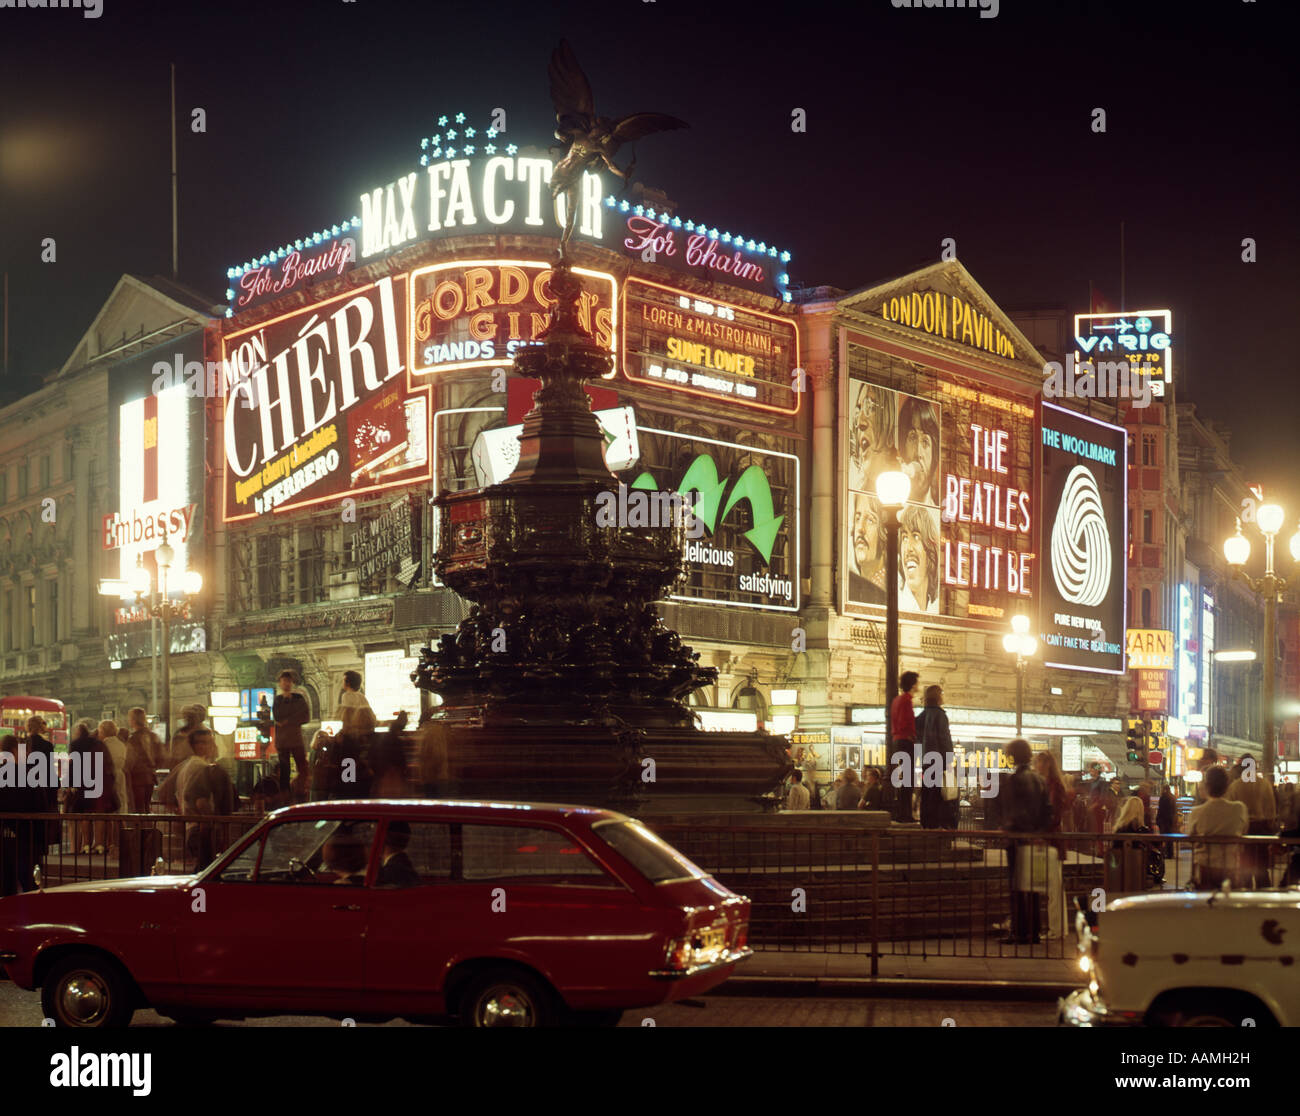 1960 1960 1970 1970 RETRO Picadilly Circus Banque D'Images